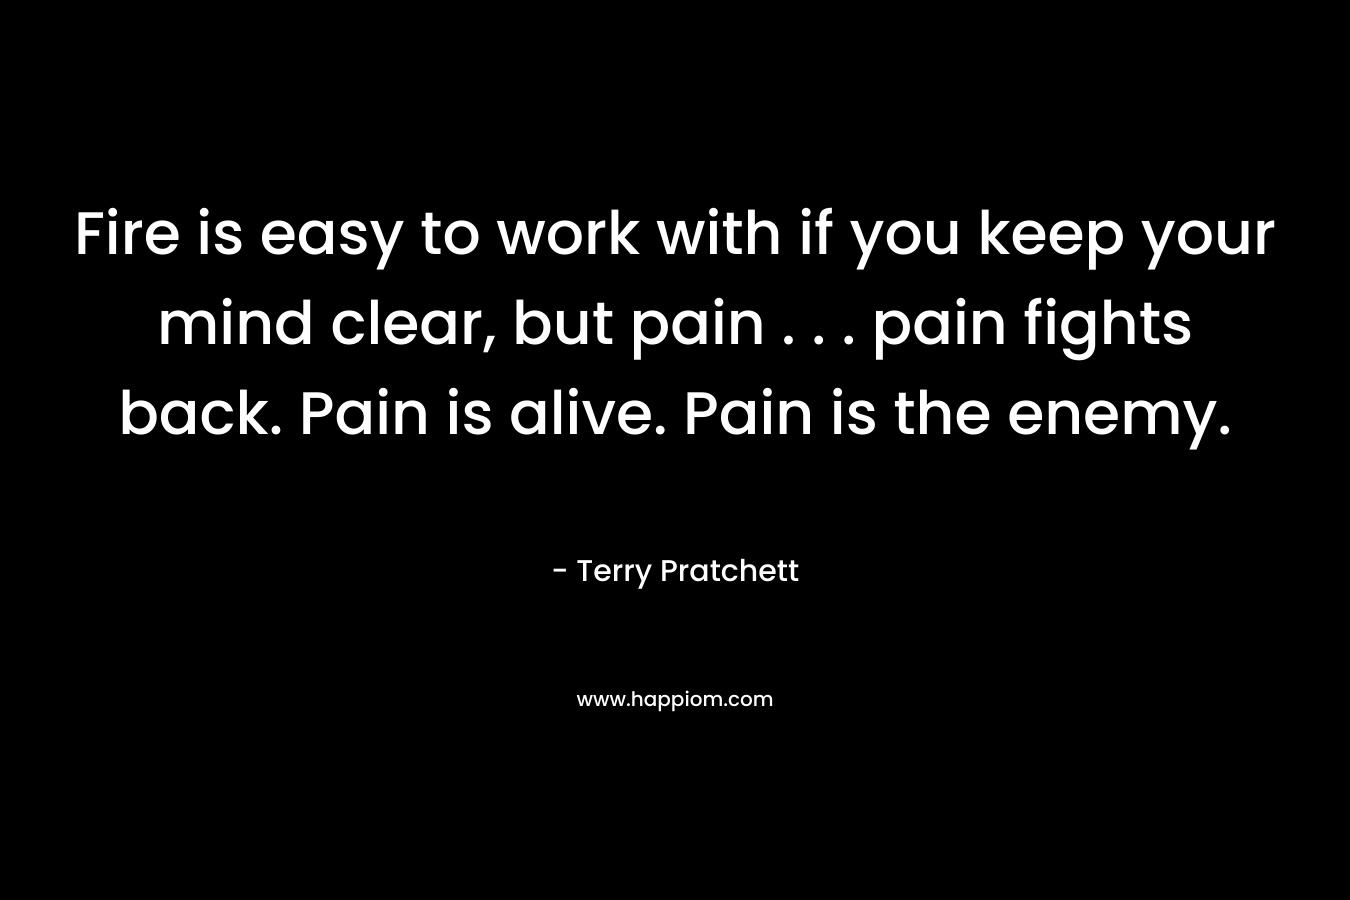 Fire is easy to work with if you keep your mind clear, but pain . . . pain fights back. Pain is alive. Pain is the enemy.